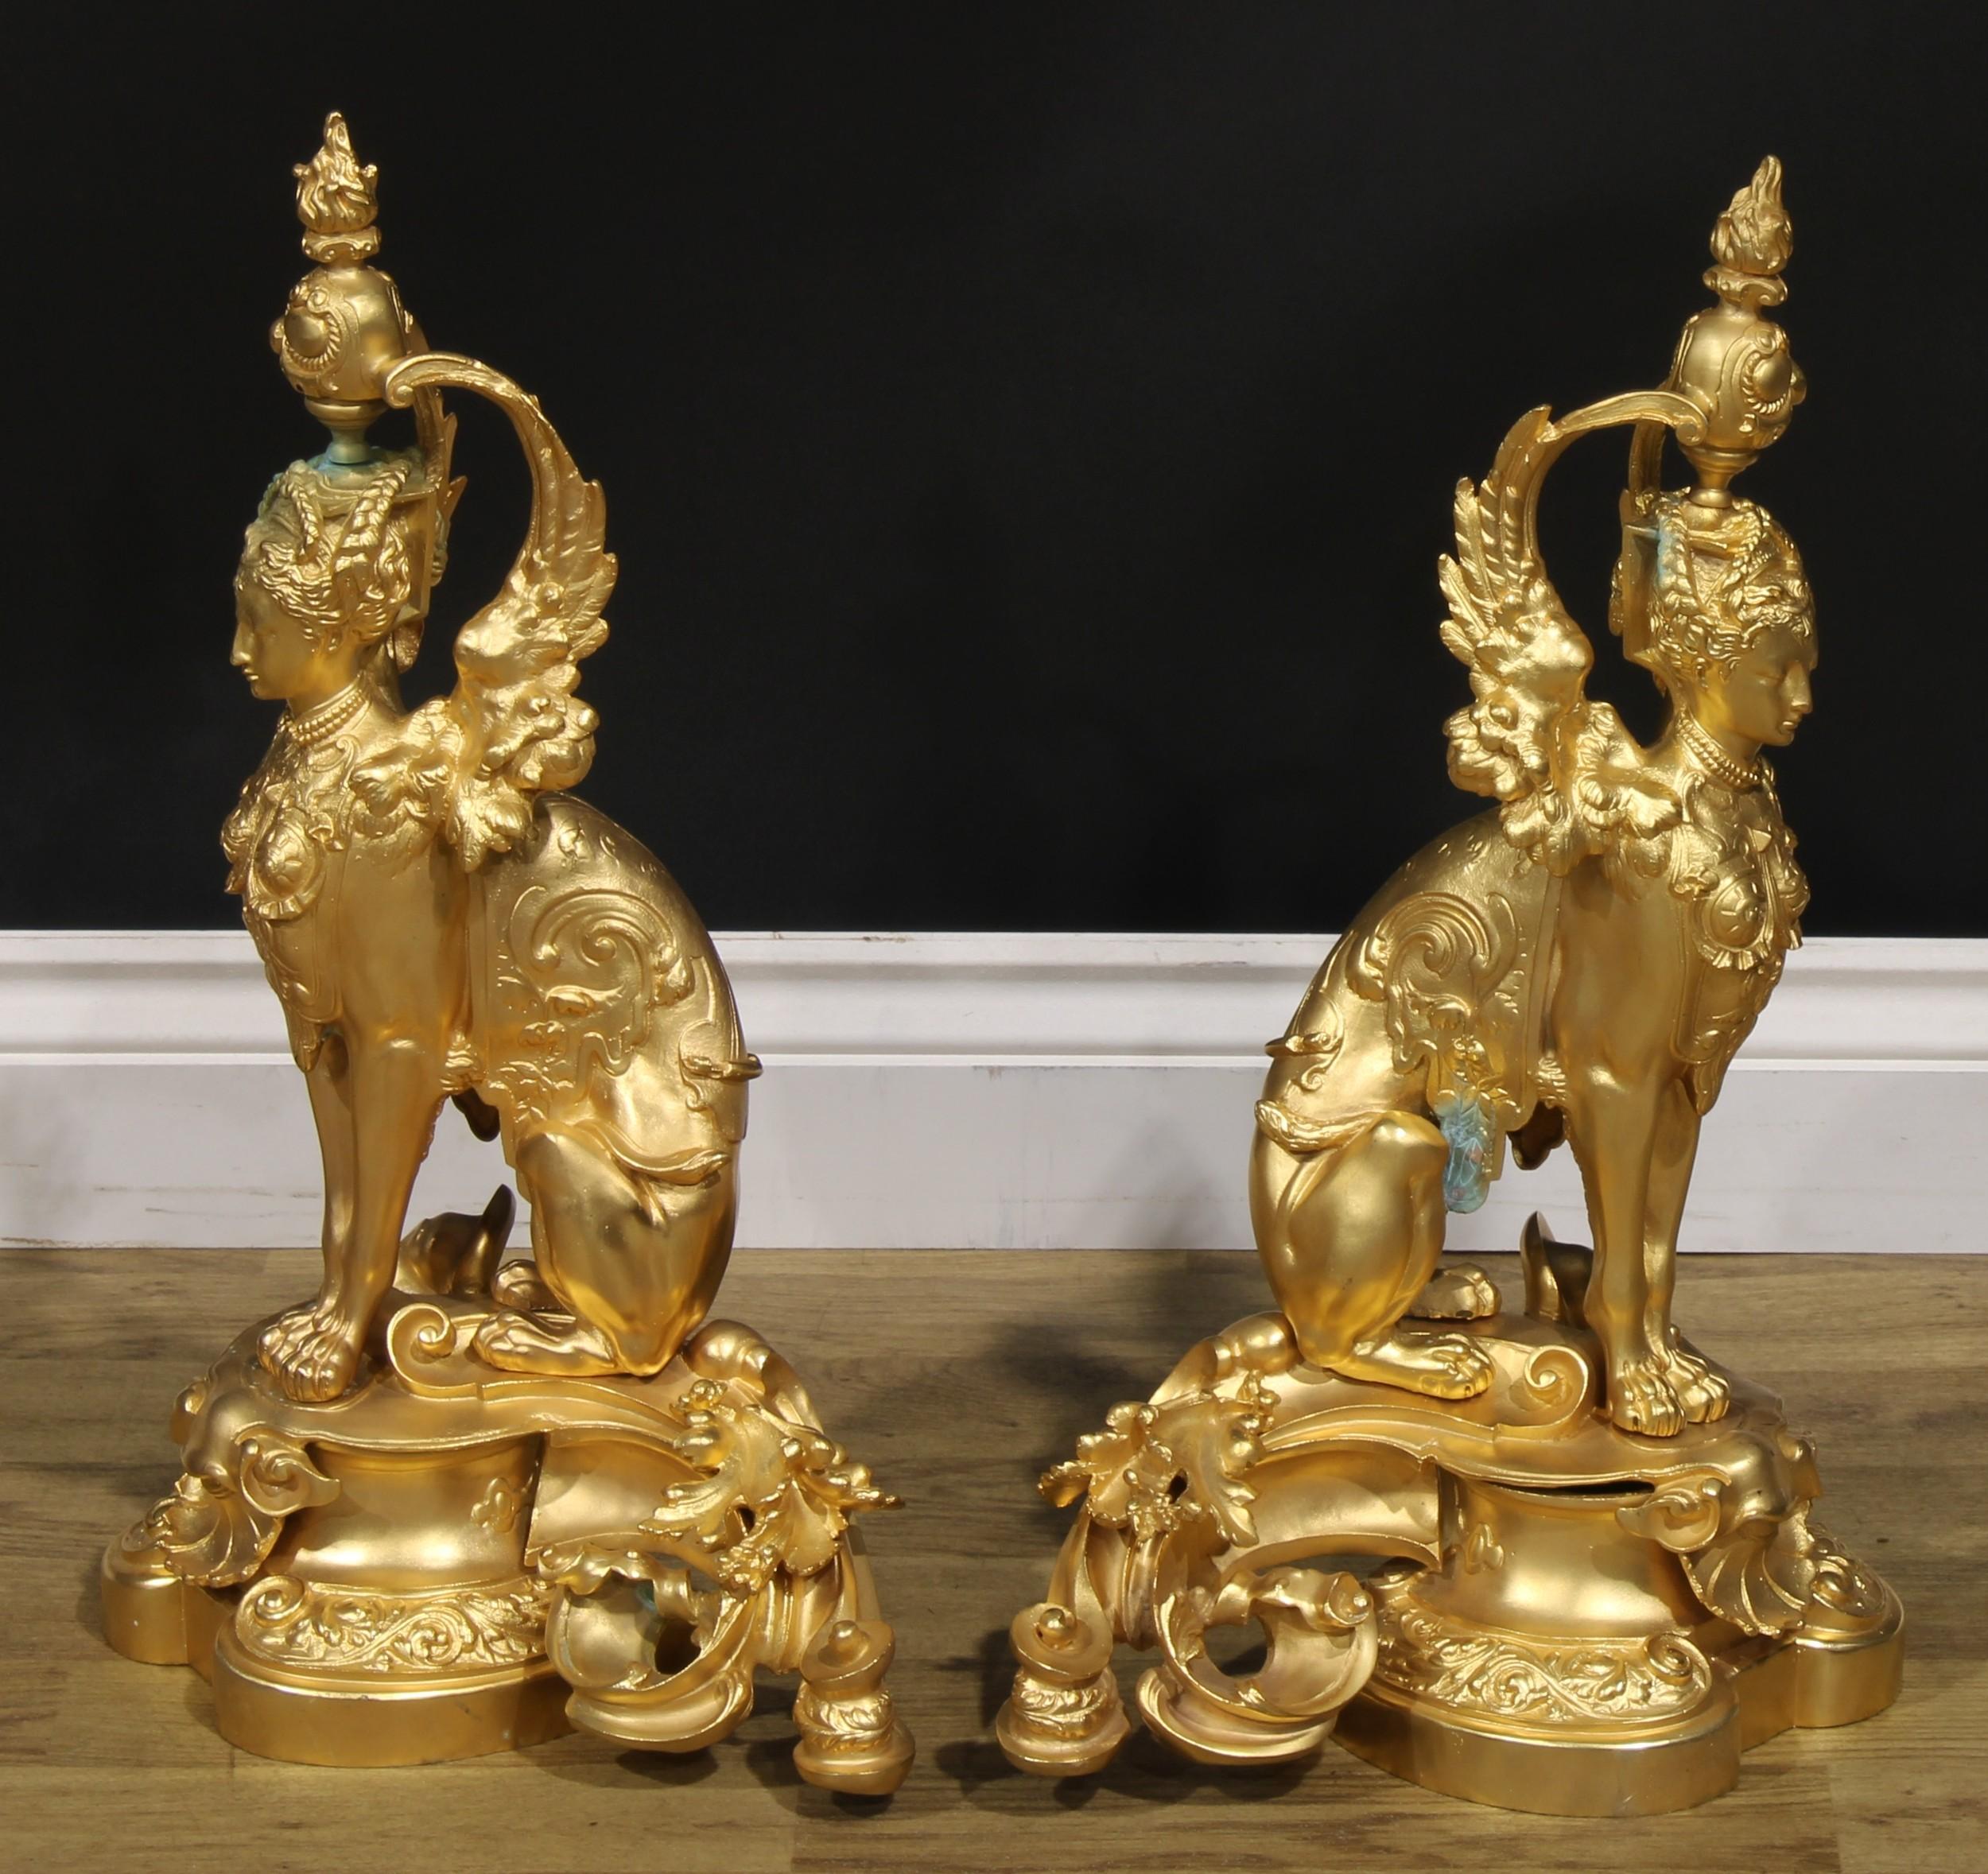 Striking Pair of Gilt Metal French Rococo Greek Sphinx Chenets Andirons 
Good overall condition

Free international shipping.